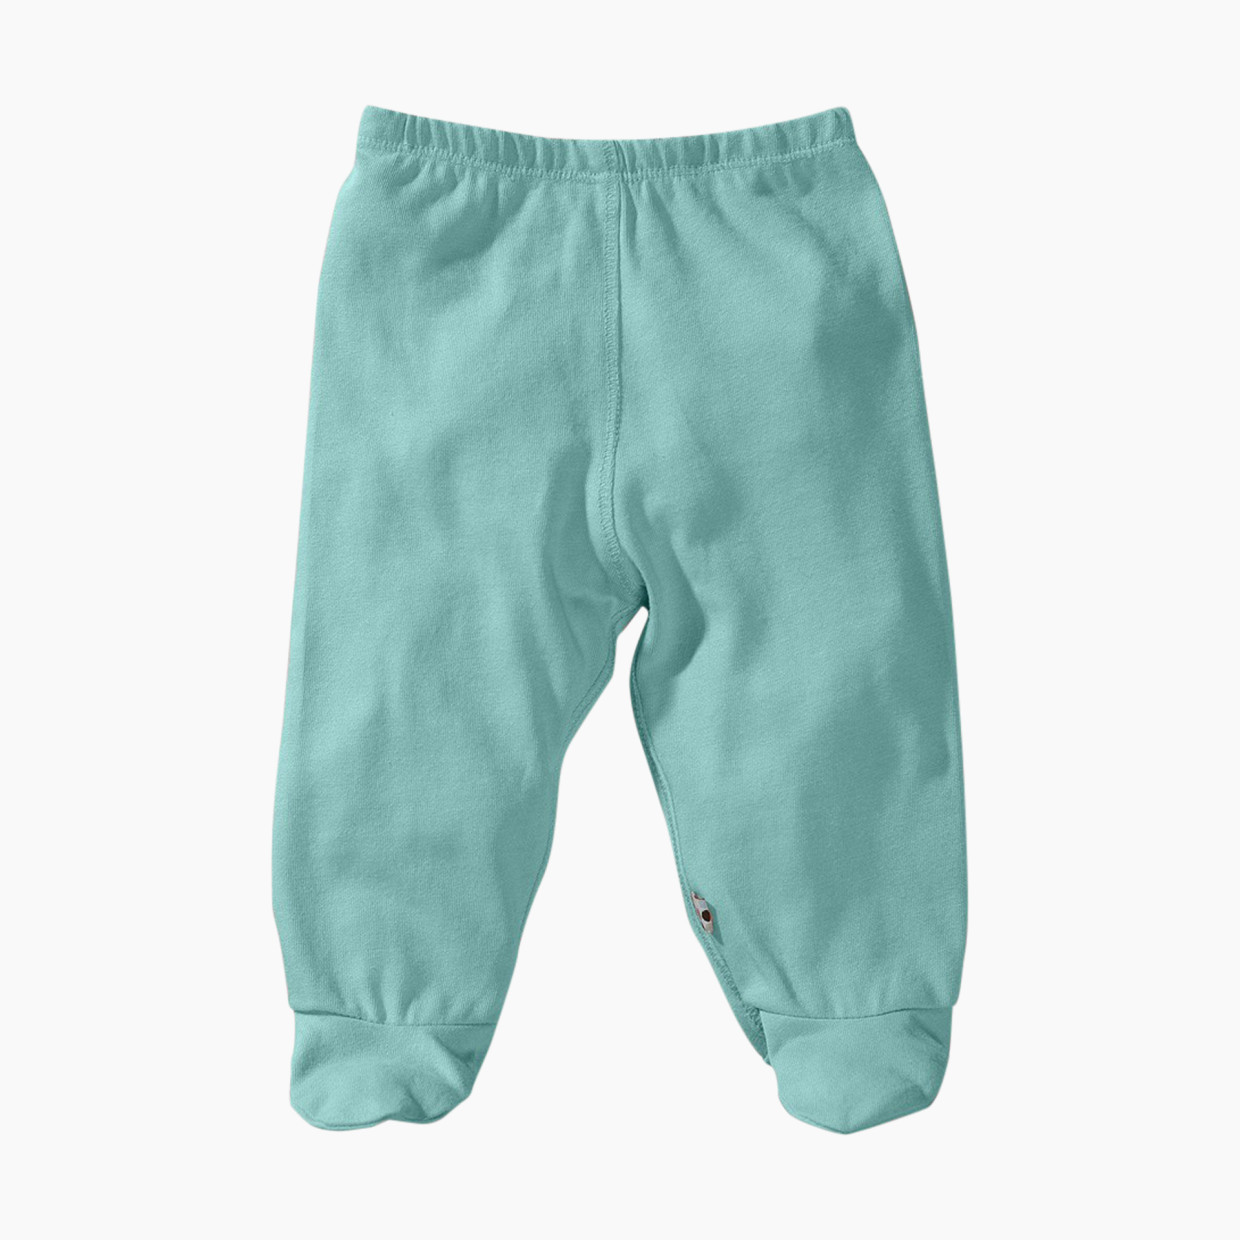 Babysoy Organic Cotton Solid Footie Pants - Harbor, 3-6 Months.